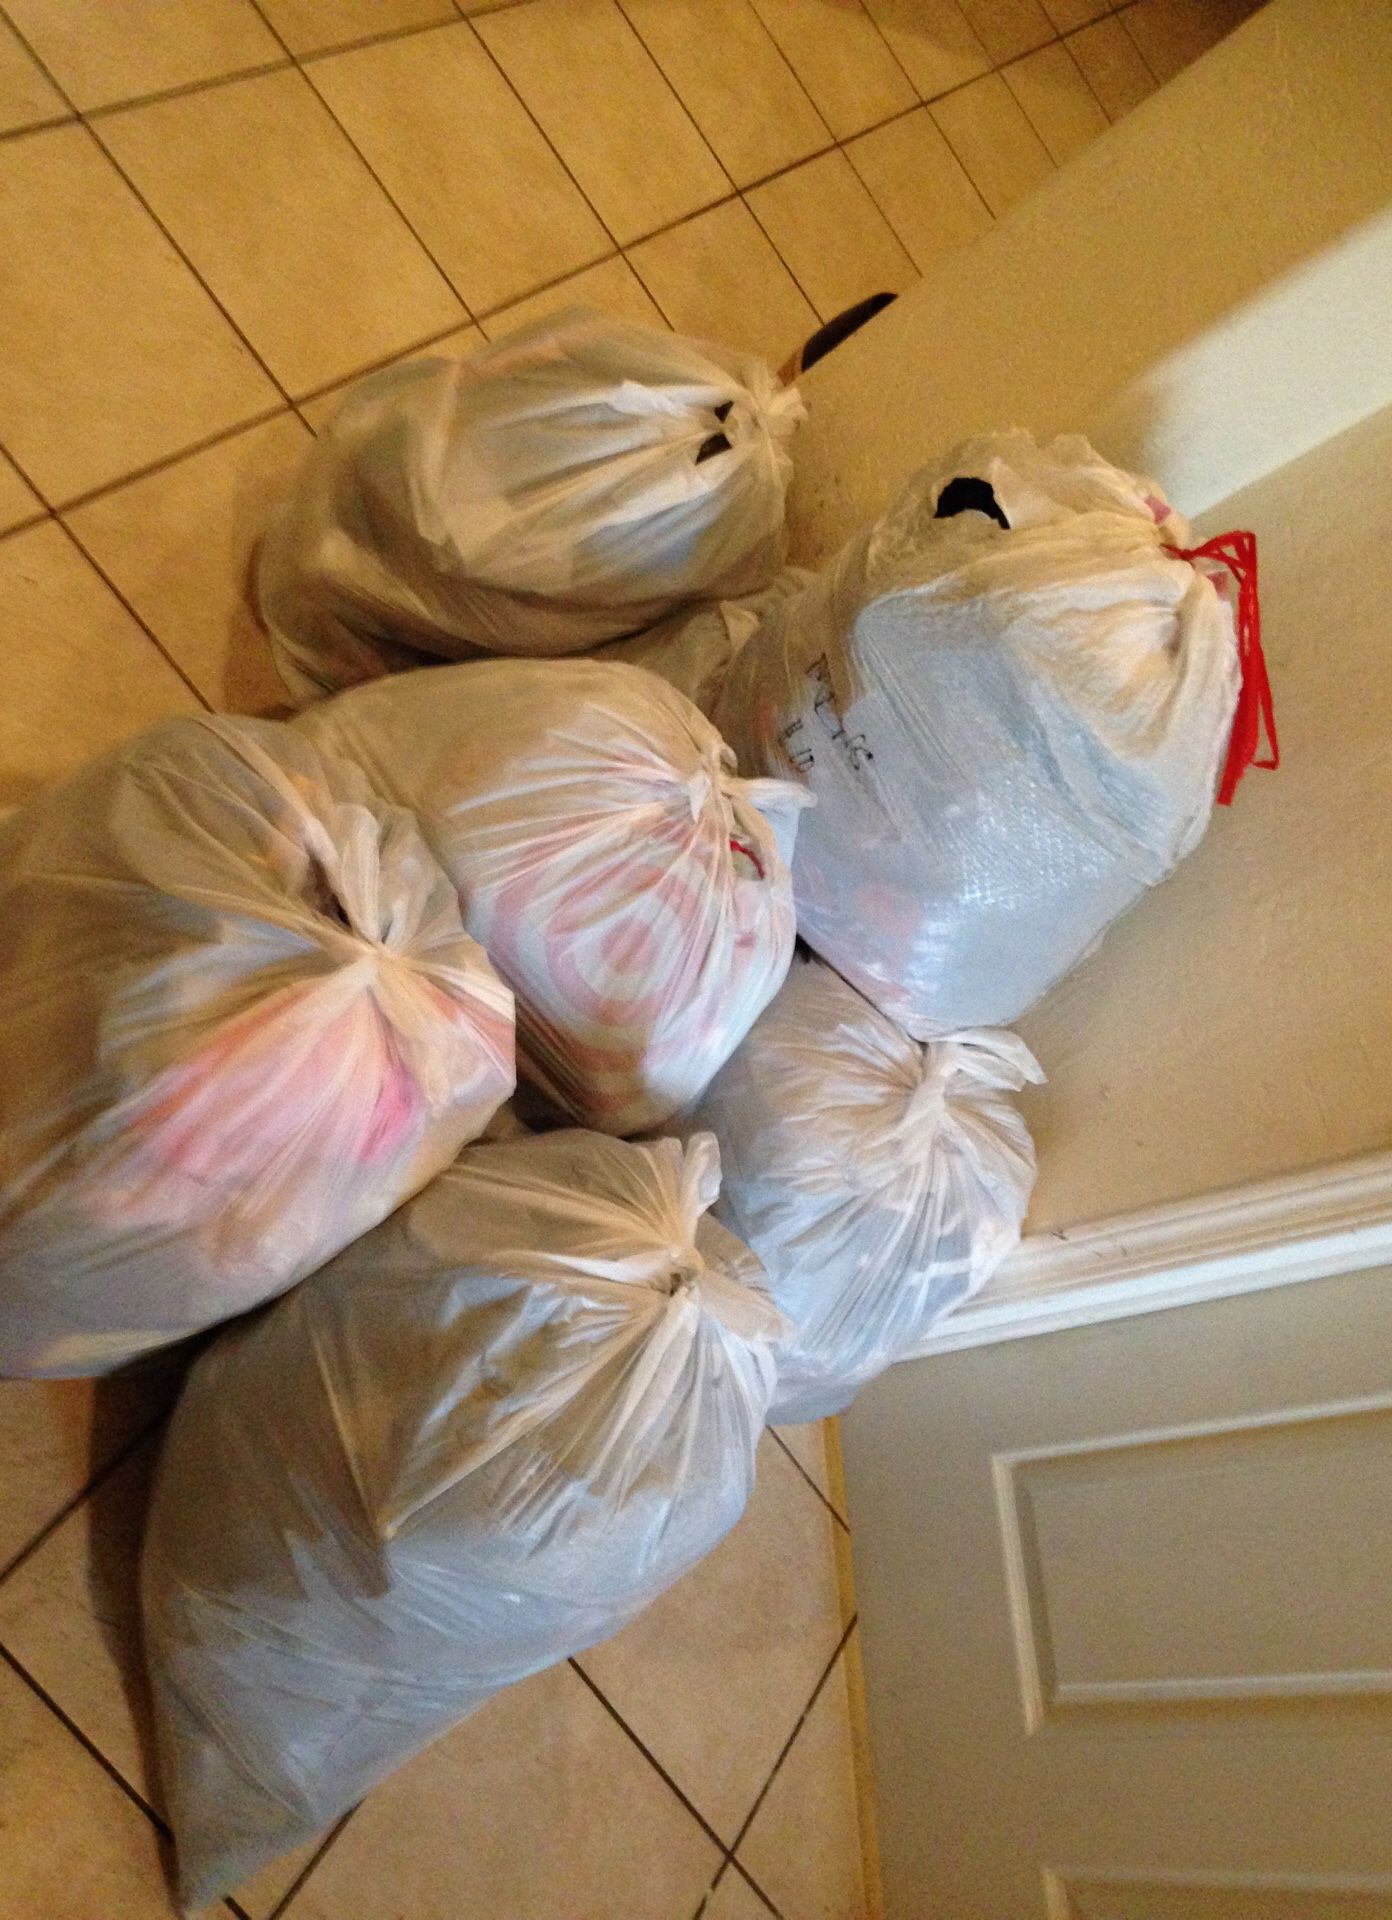 FREE!! 7 bags of clothes tv and 2audio receivers FREE!!!